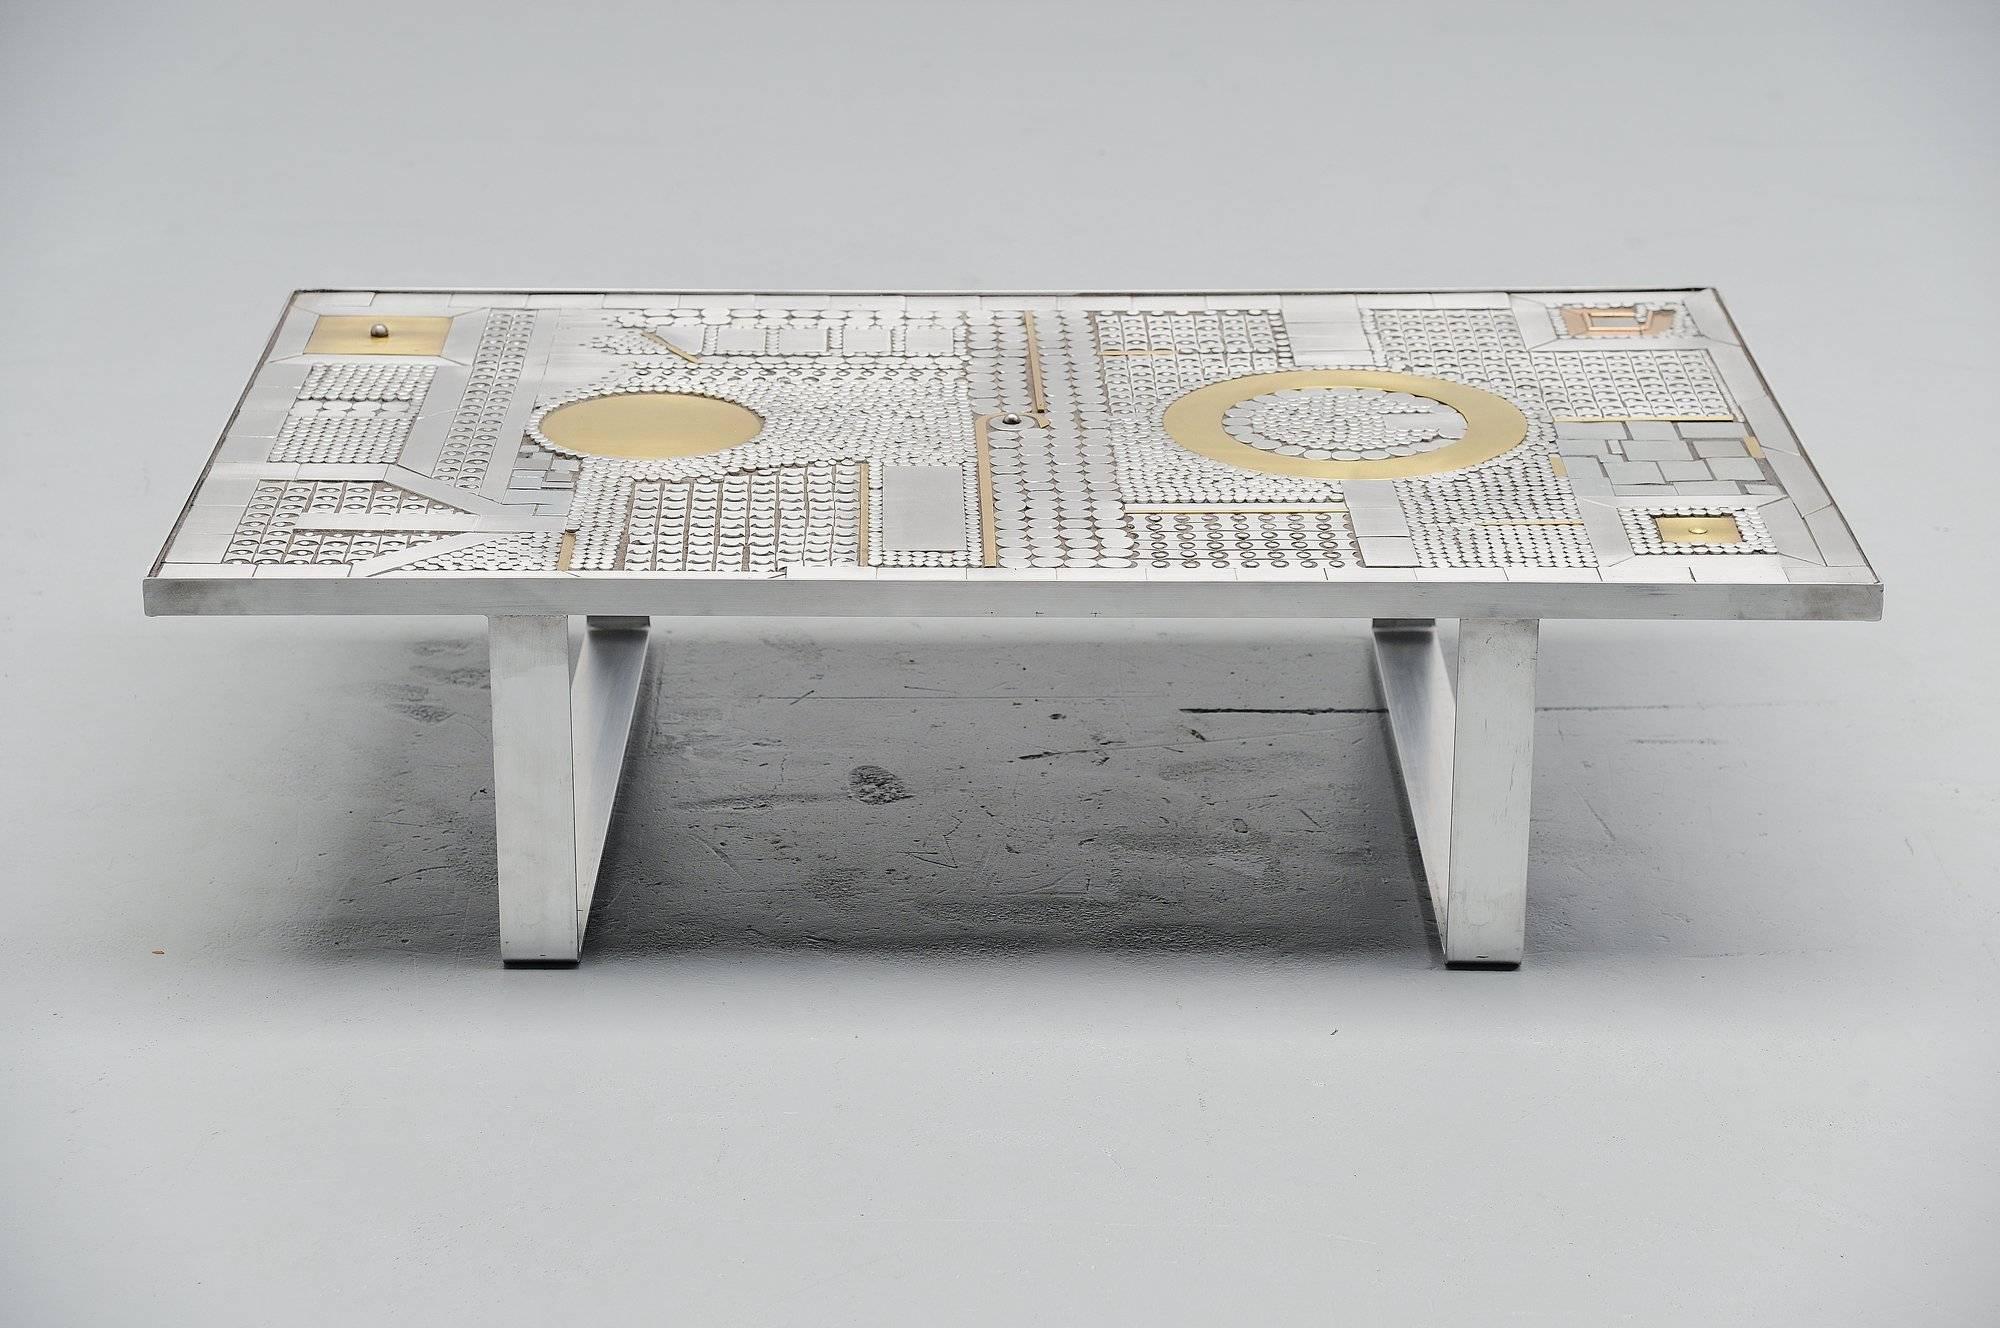 Fantastic crafted coffee table designed by Raf Verjans, manufactured in his own atelier in Belgium, 1970. This table has a steel frame and is completely inlayed with aluminum and brass parts which gives a great look. Raf Verjans can be scaled